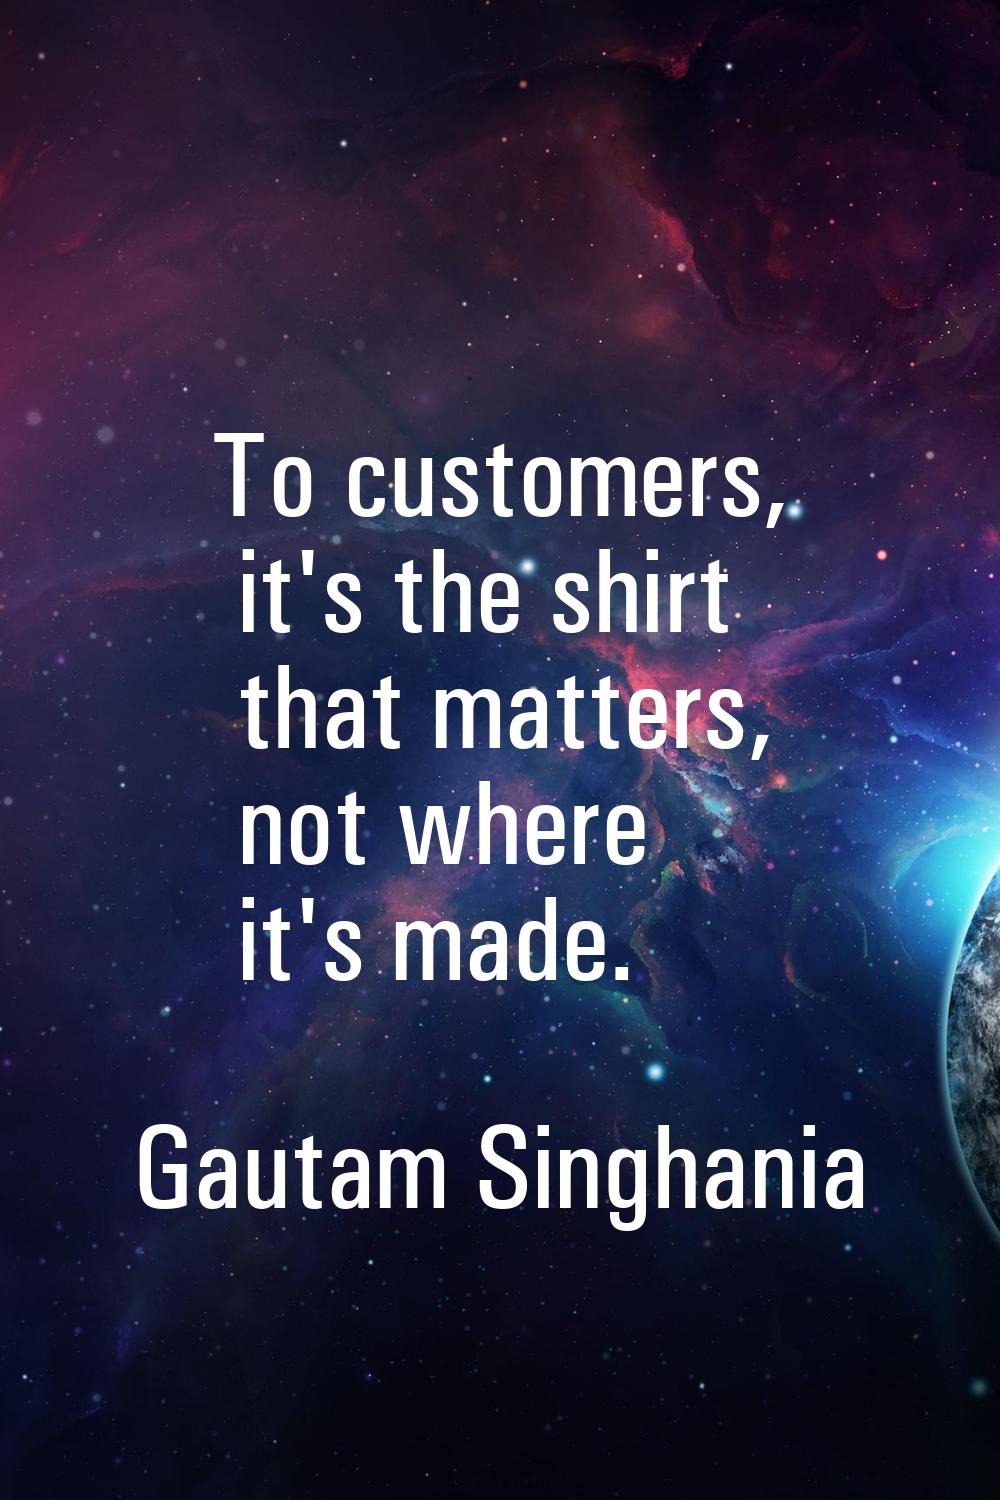 To customers, it's the shirt that matters, not where it's made.